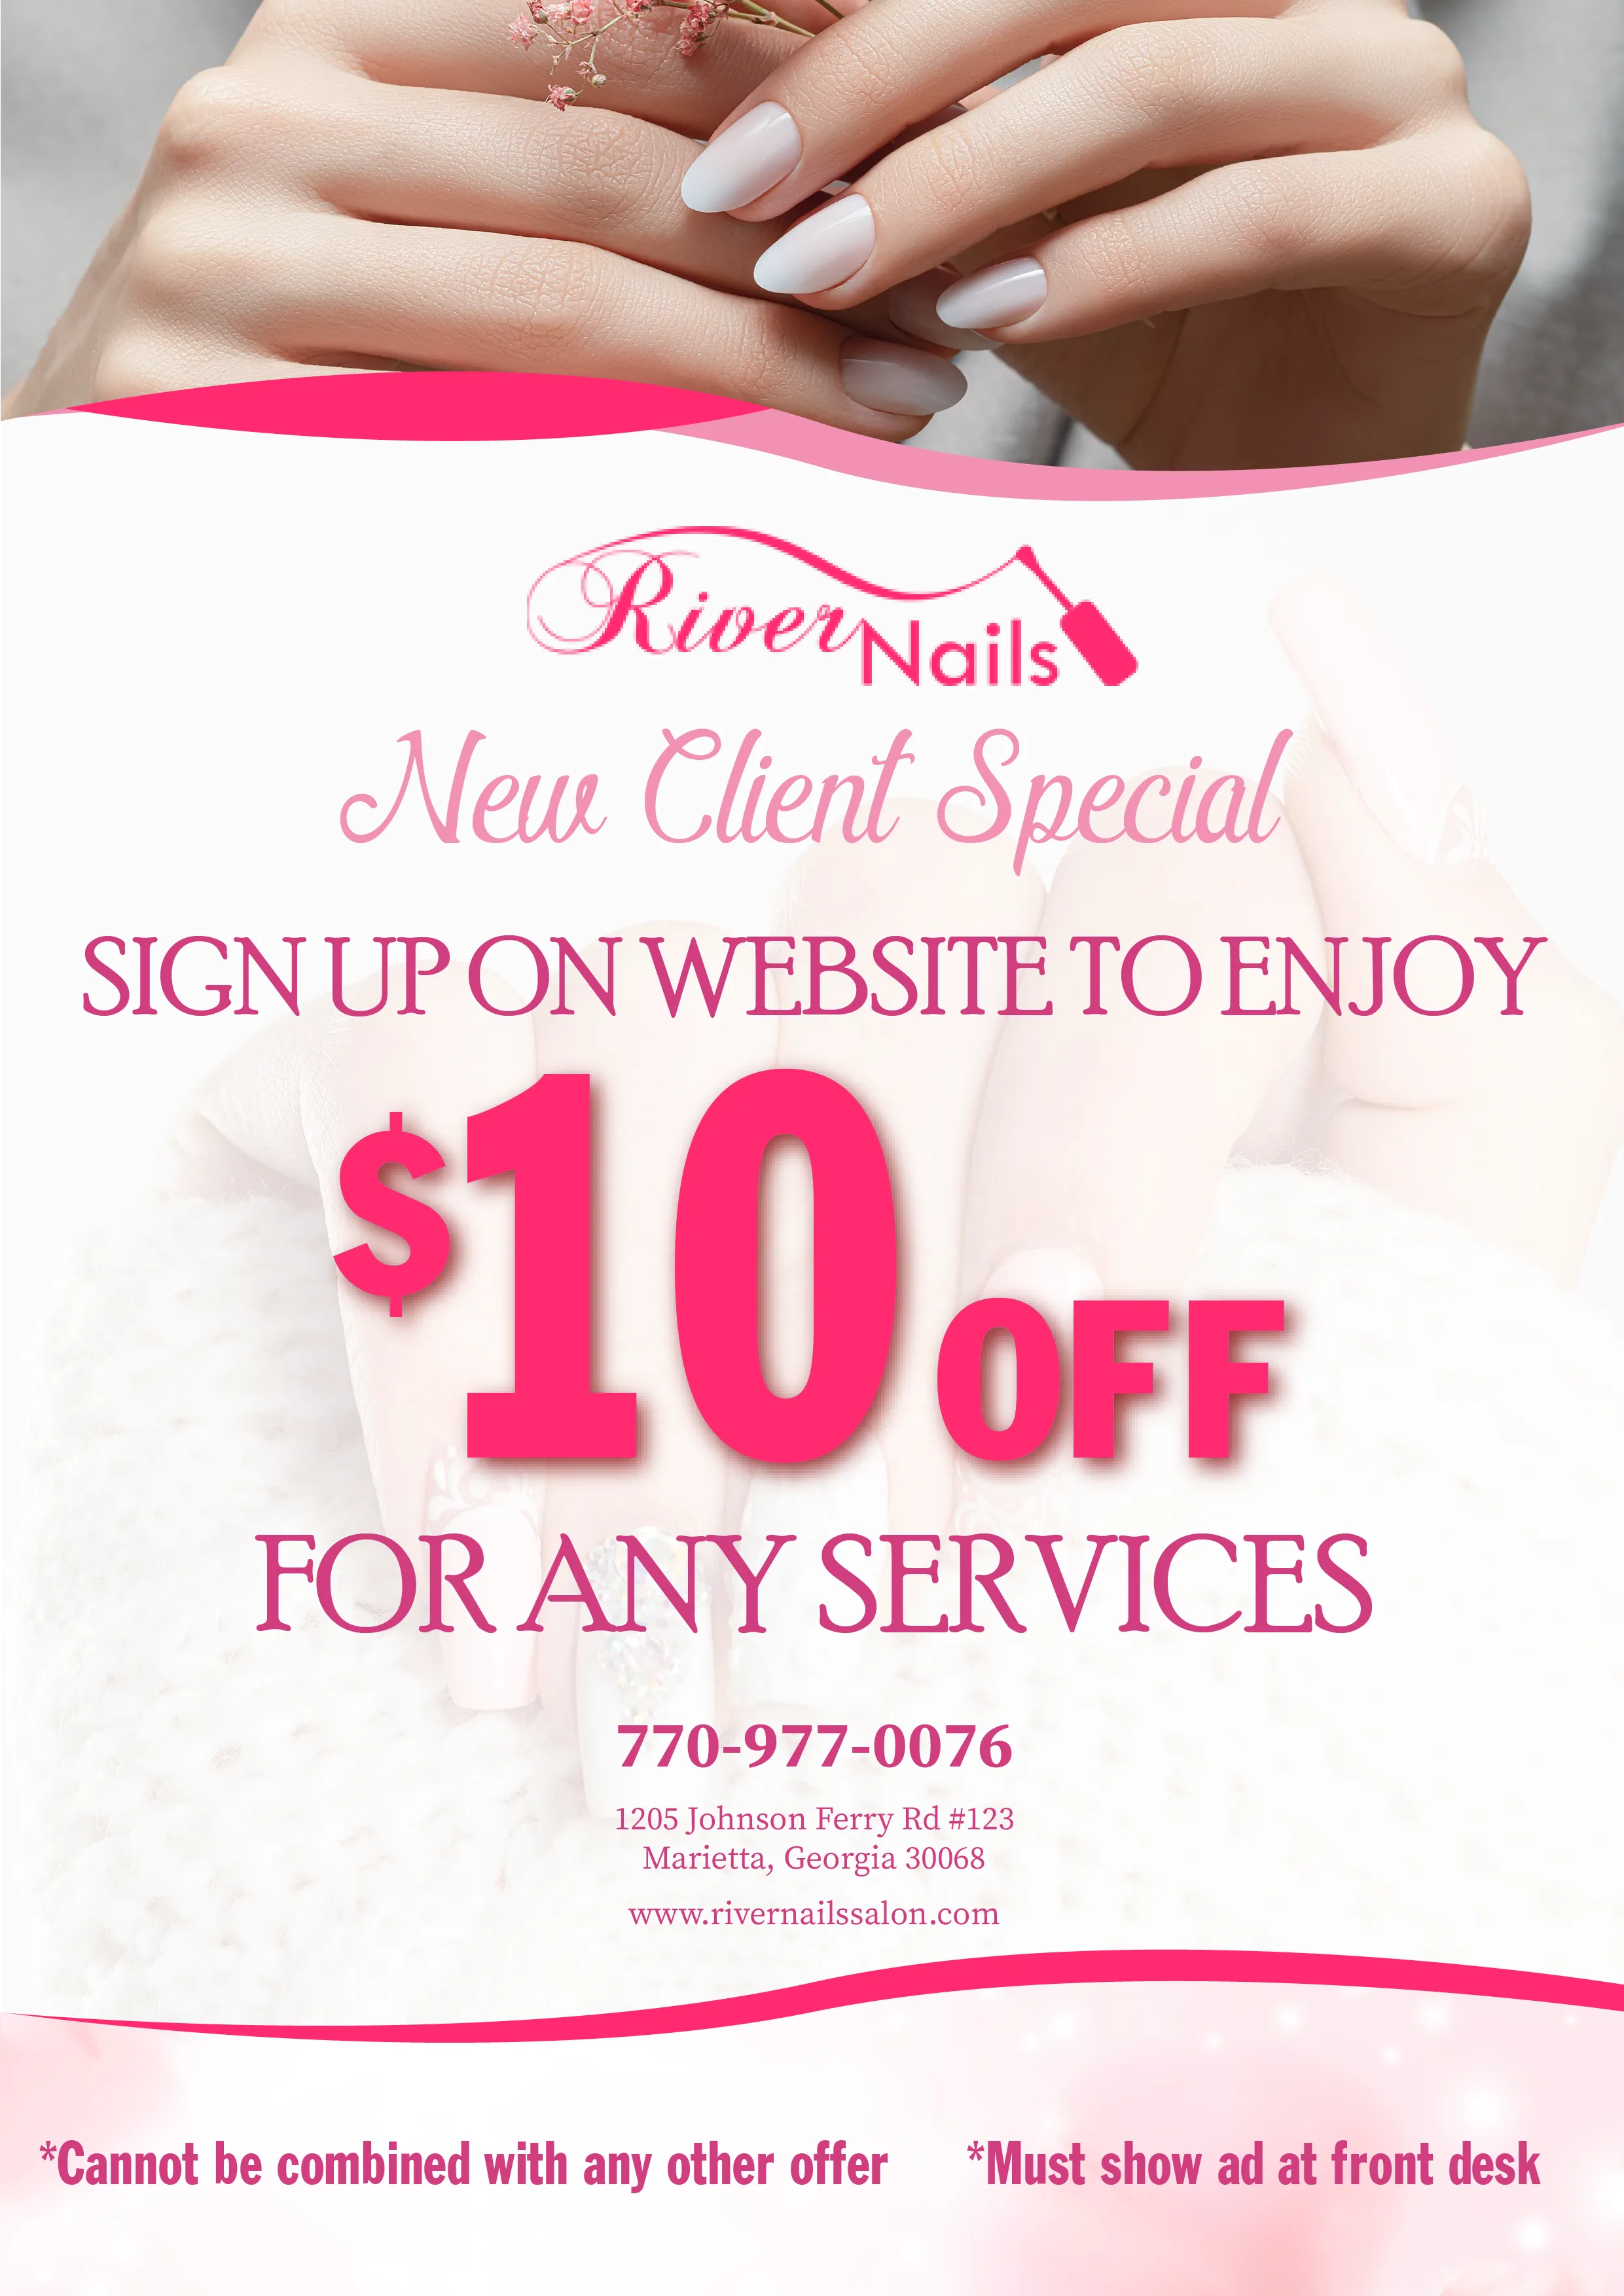 Promotions | Trish Nails & Spa of Winterville, North Carolina 28590 |  Manicure, Spa Pedicure, Artificial Nails, Dipping, Gels, Nail Arts, Waxing,  Lashes Extension